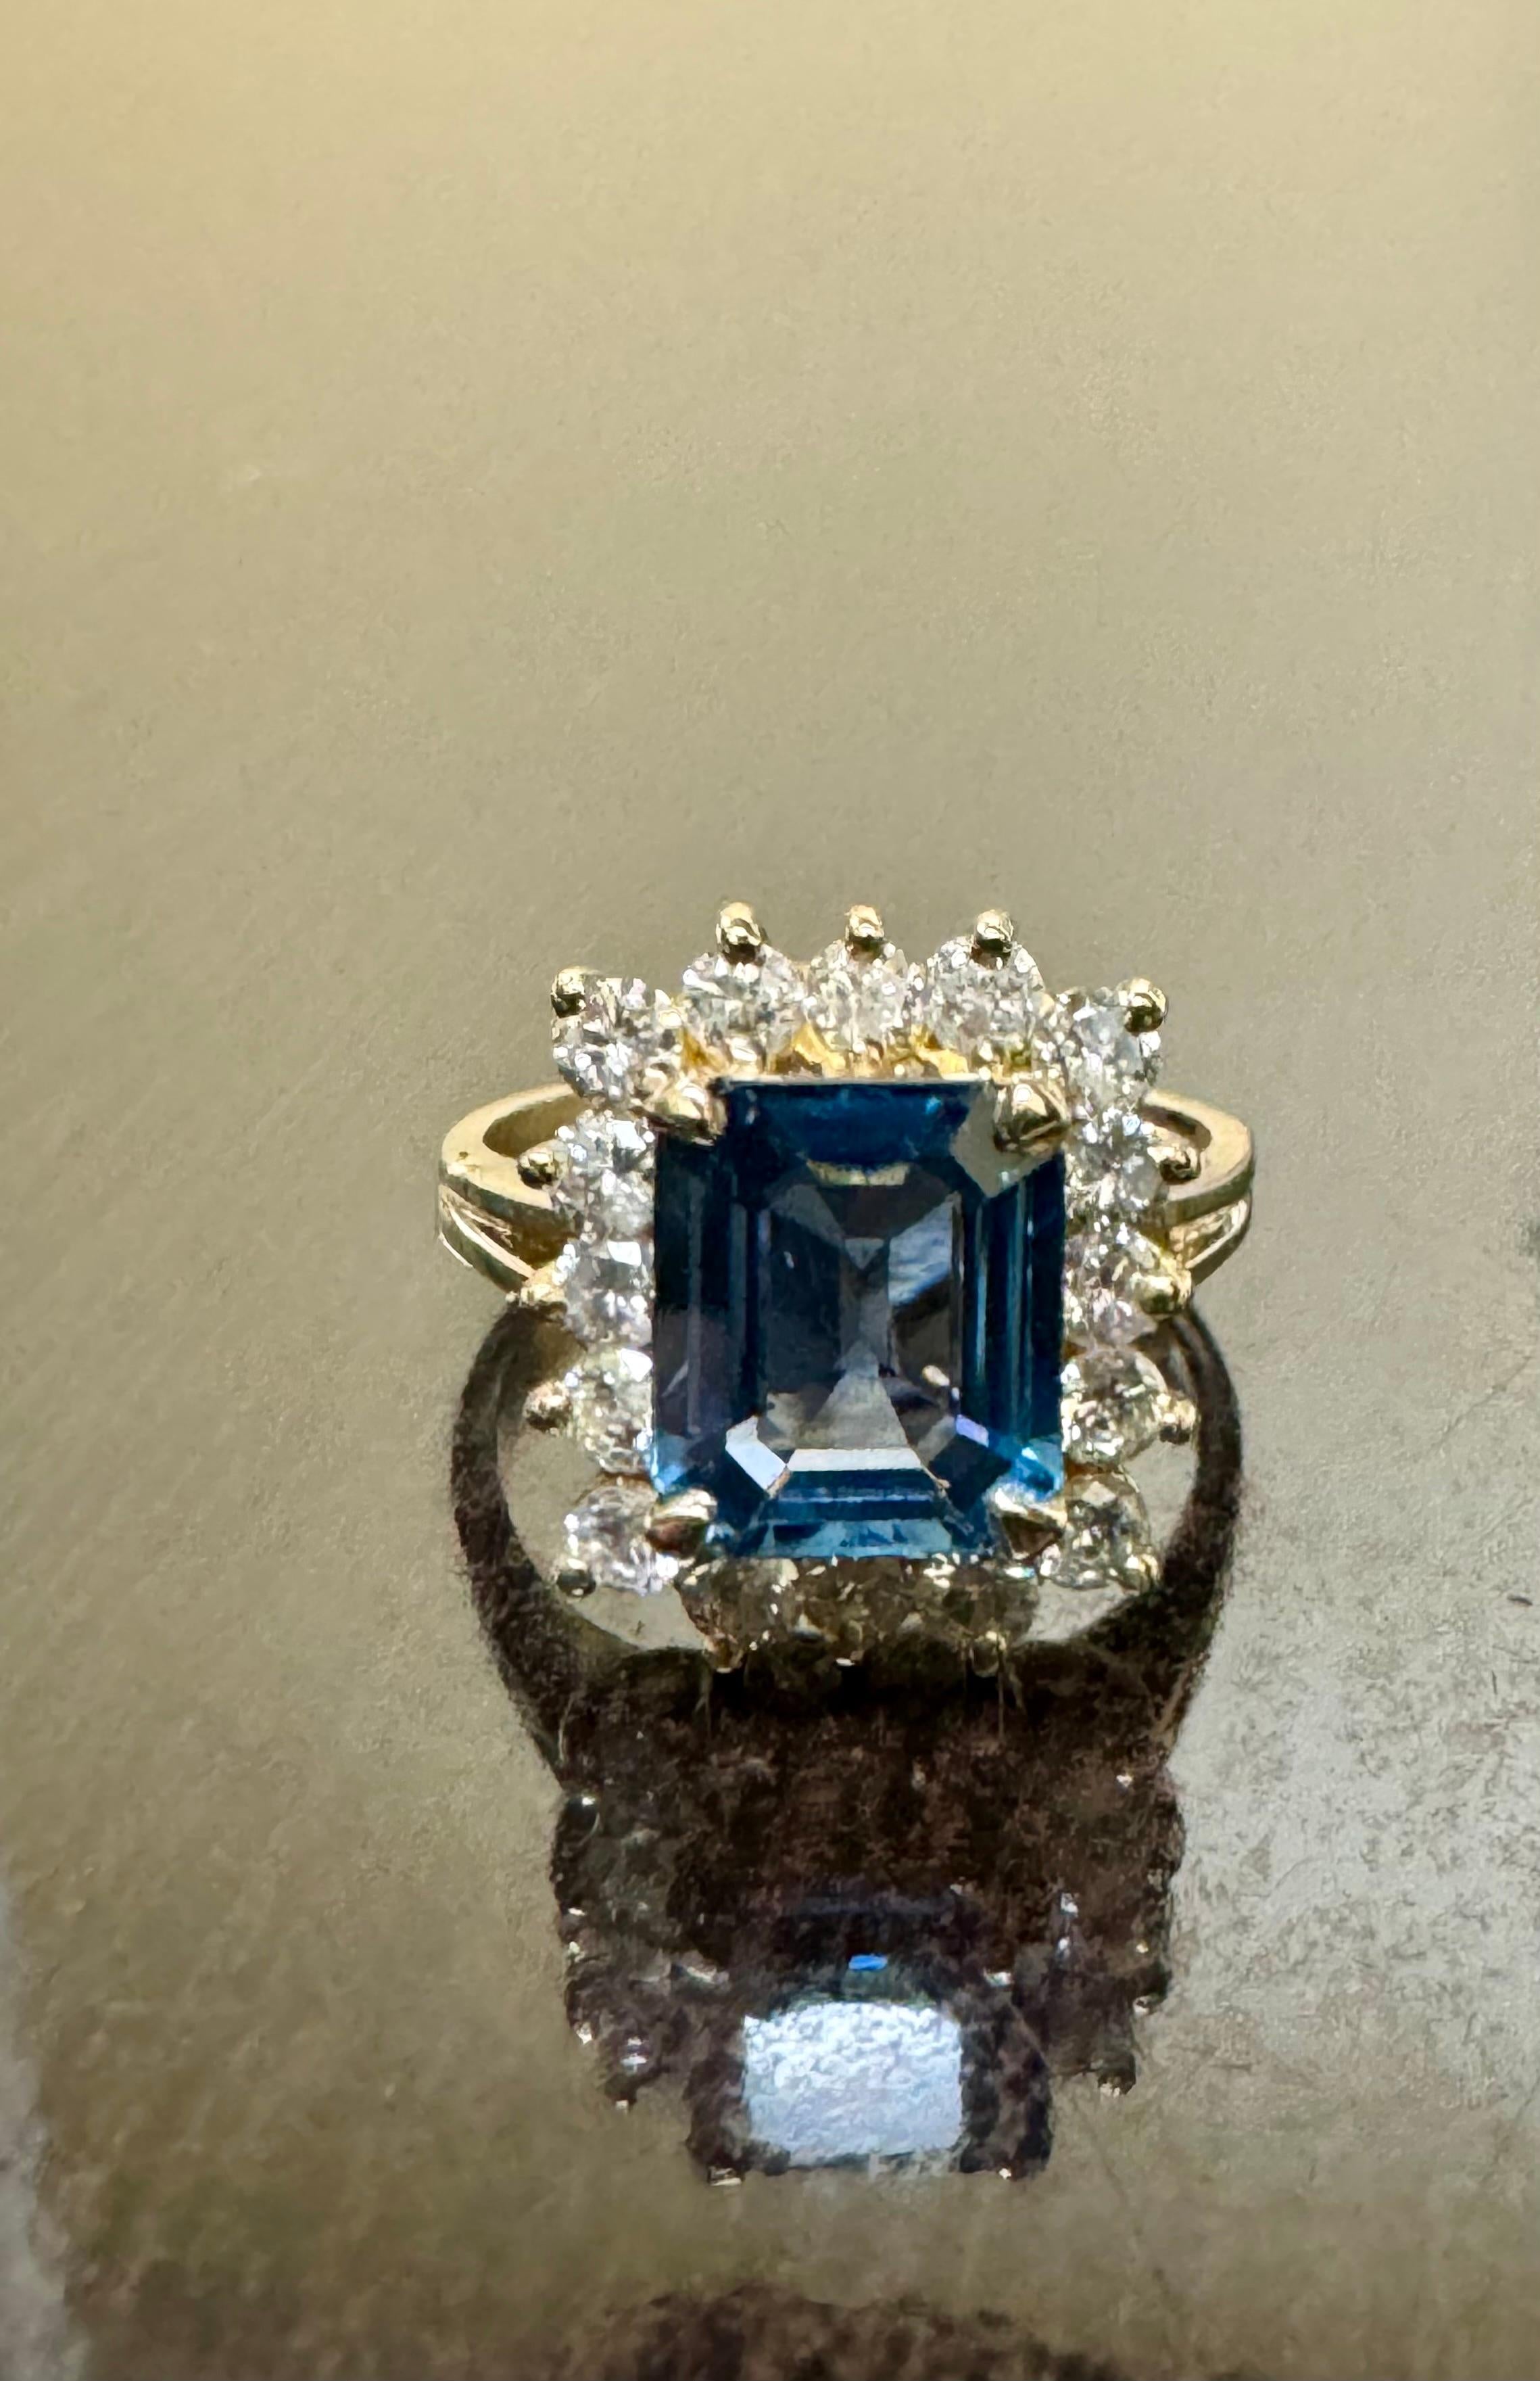 DeKara Designs Collection

Metal- 14K Yellow Gold, .583.

Stones- 1 Emerald Cut Blue Sapphire 2.54 Carats, 16 Round Diamonds G-H Color SI2 Clarity 0.96 Carats.  

Size- 6. FREE SIZING!!!!

Handmade 14K Yellow Gold Halo Diamond Emerald Cut Blue